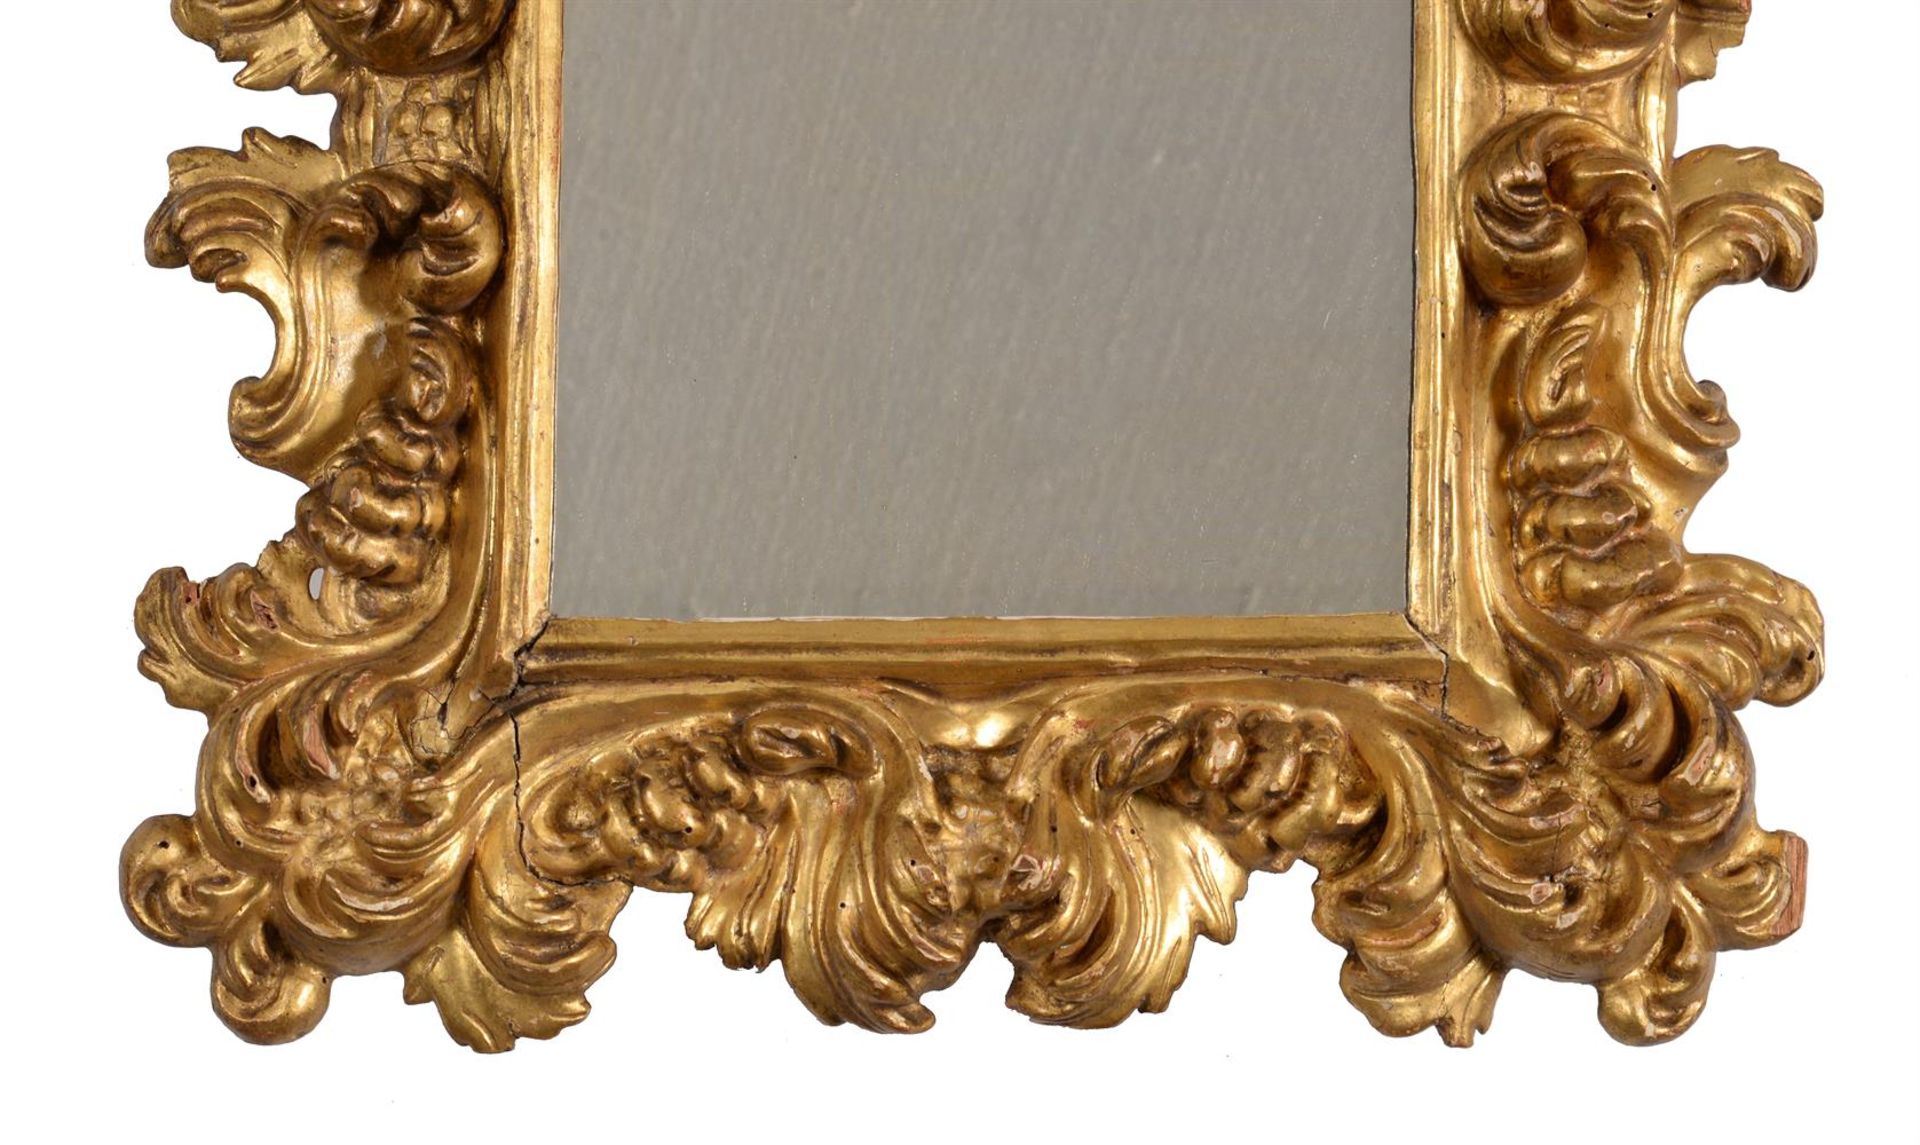 AN ITALIAN CARVED GILTWOOD WALL MIRROR, POSSIBLY FLORENTINE, 18TH CENTURY - Image 2 of 4